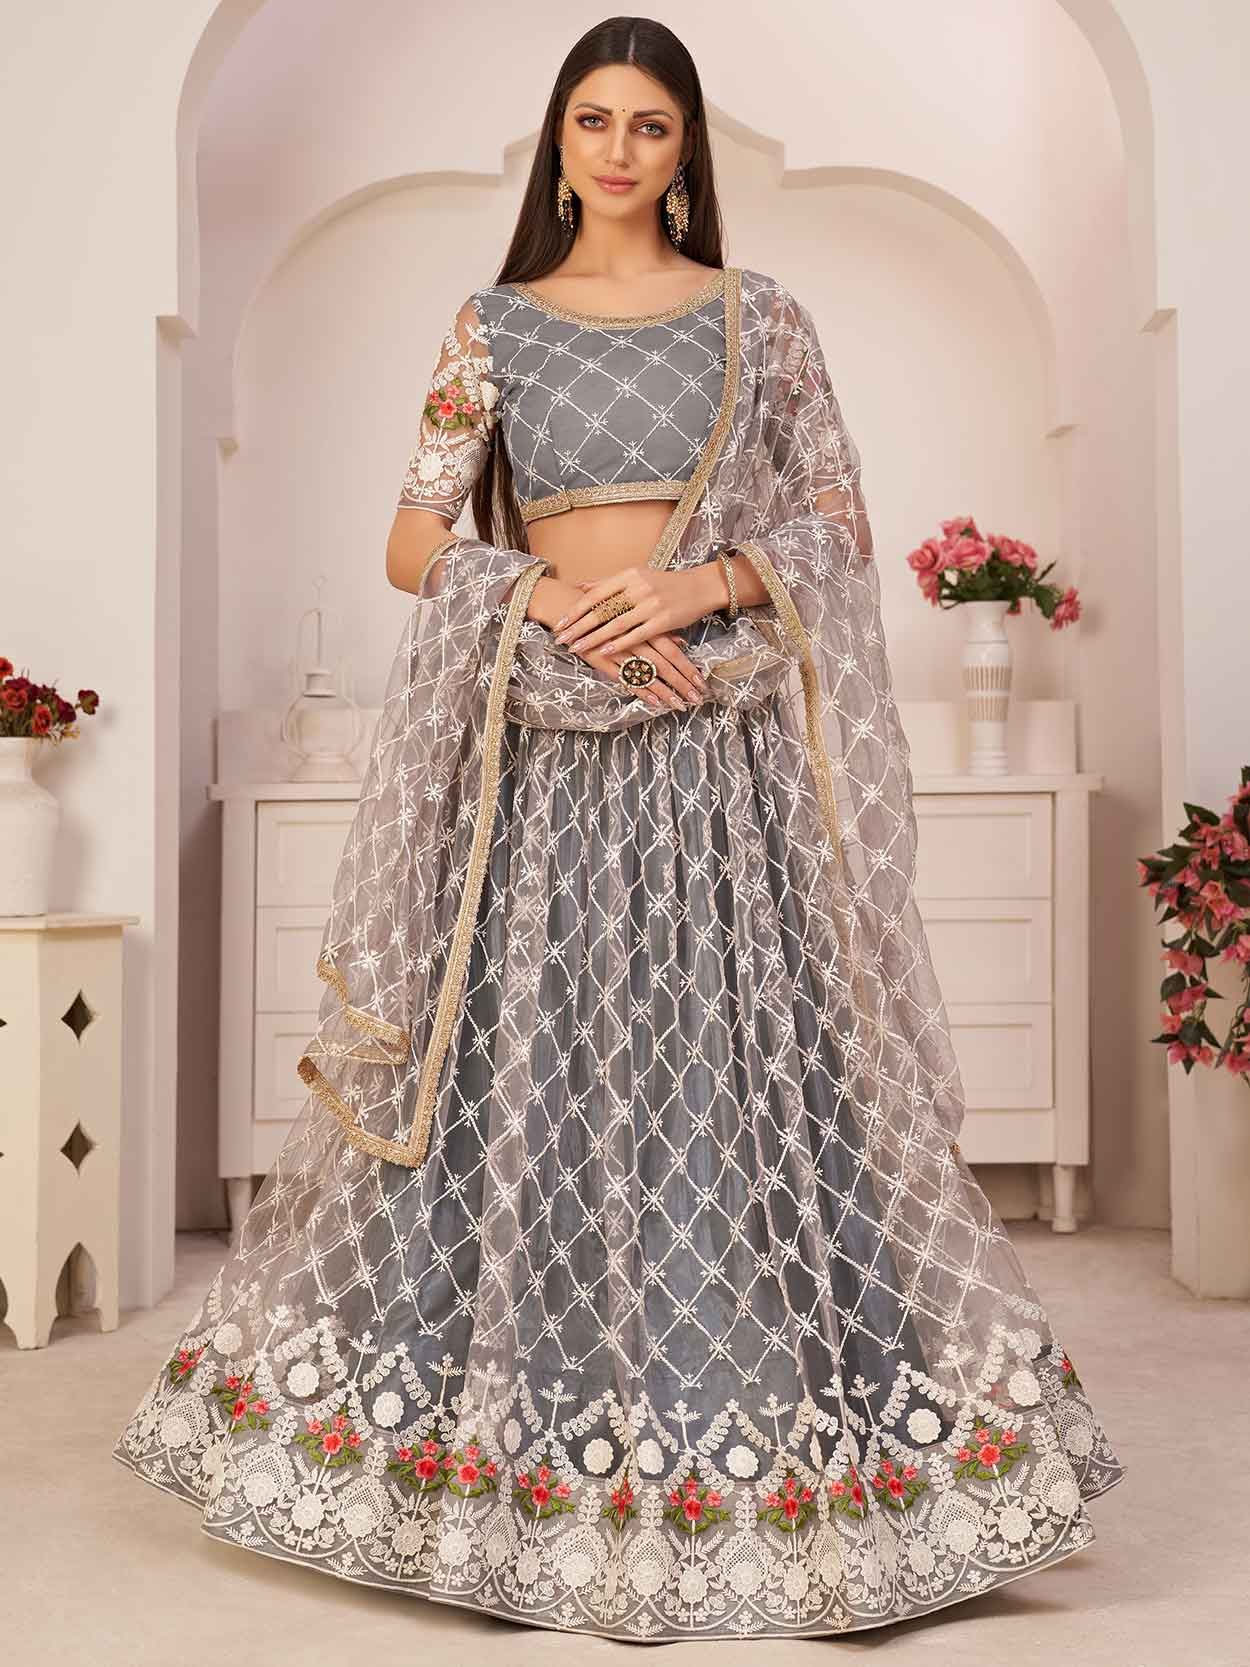 QEXTY Embroidered Semi Stitched Lehenga Choli - Buy QEXTY Embroidered Semi  Stitched Lehenga Choli Online at Best Prices in India | Flipkart.com